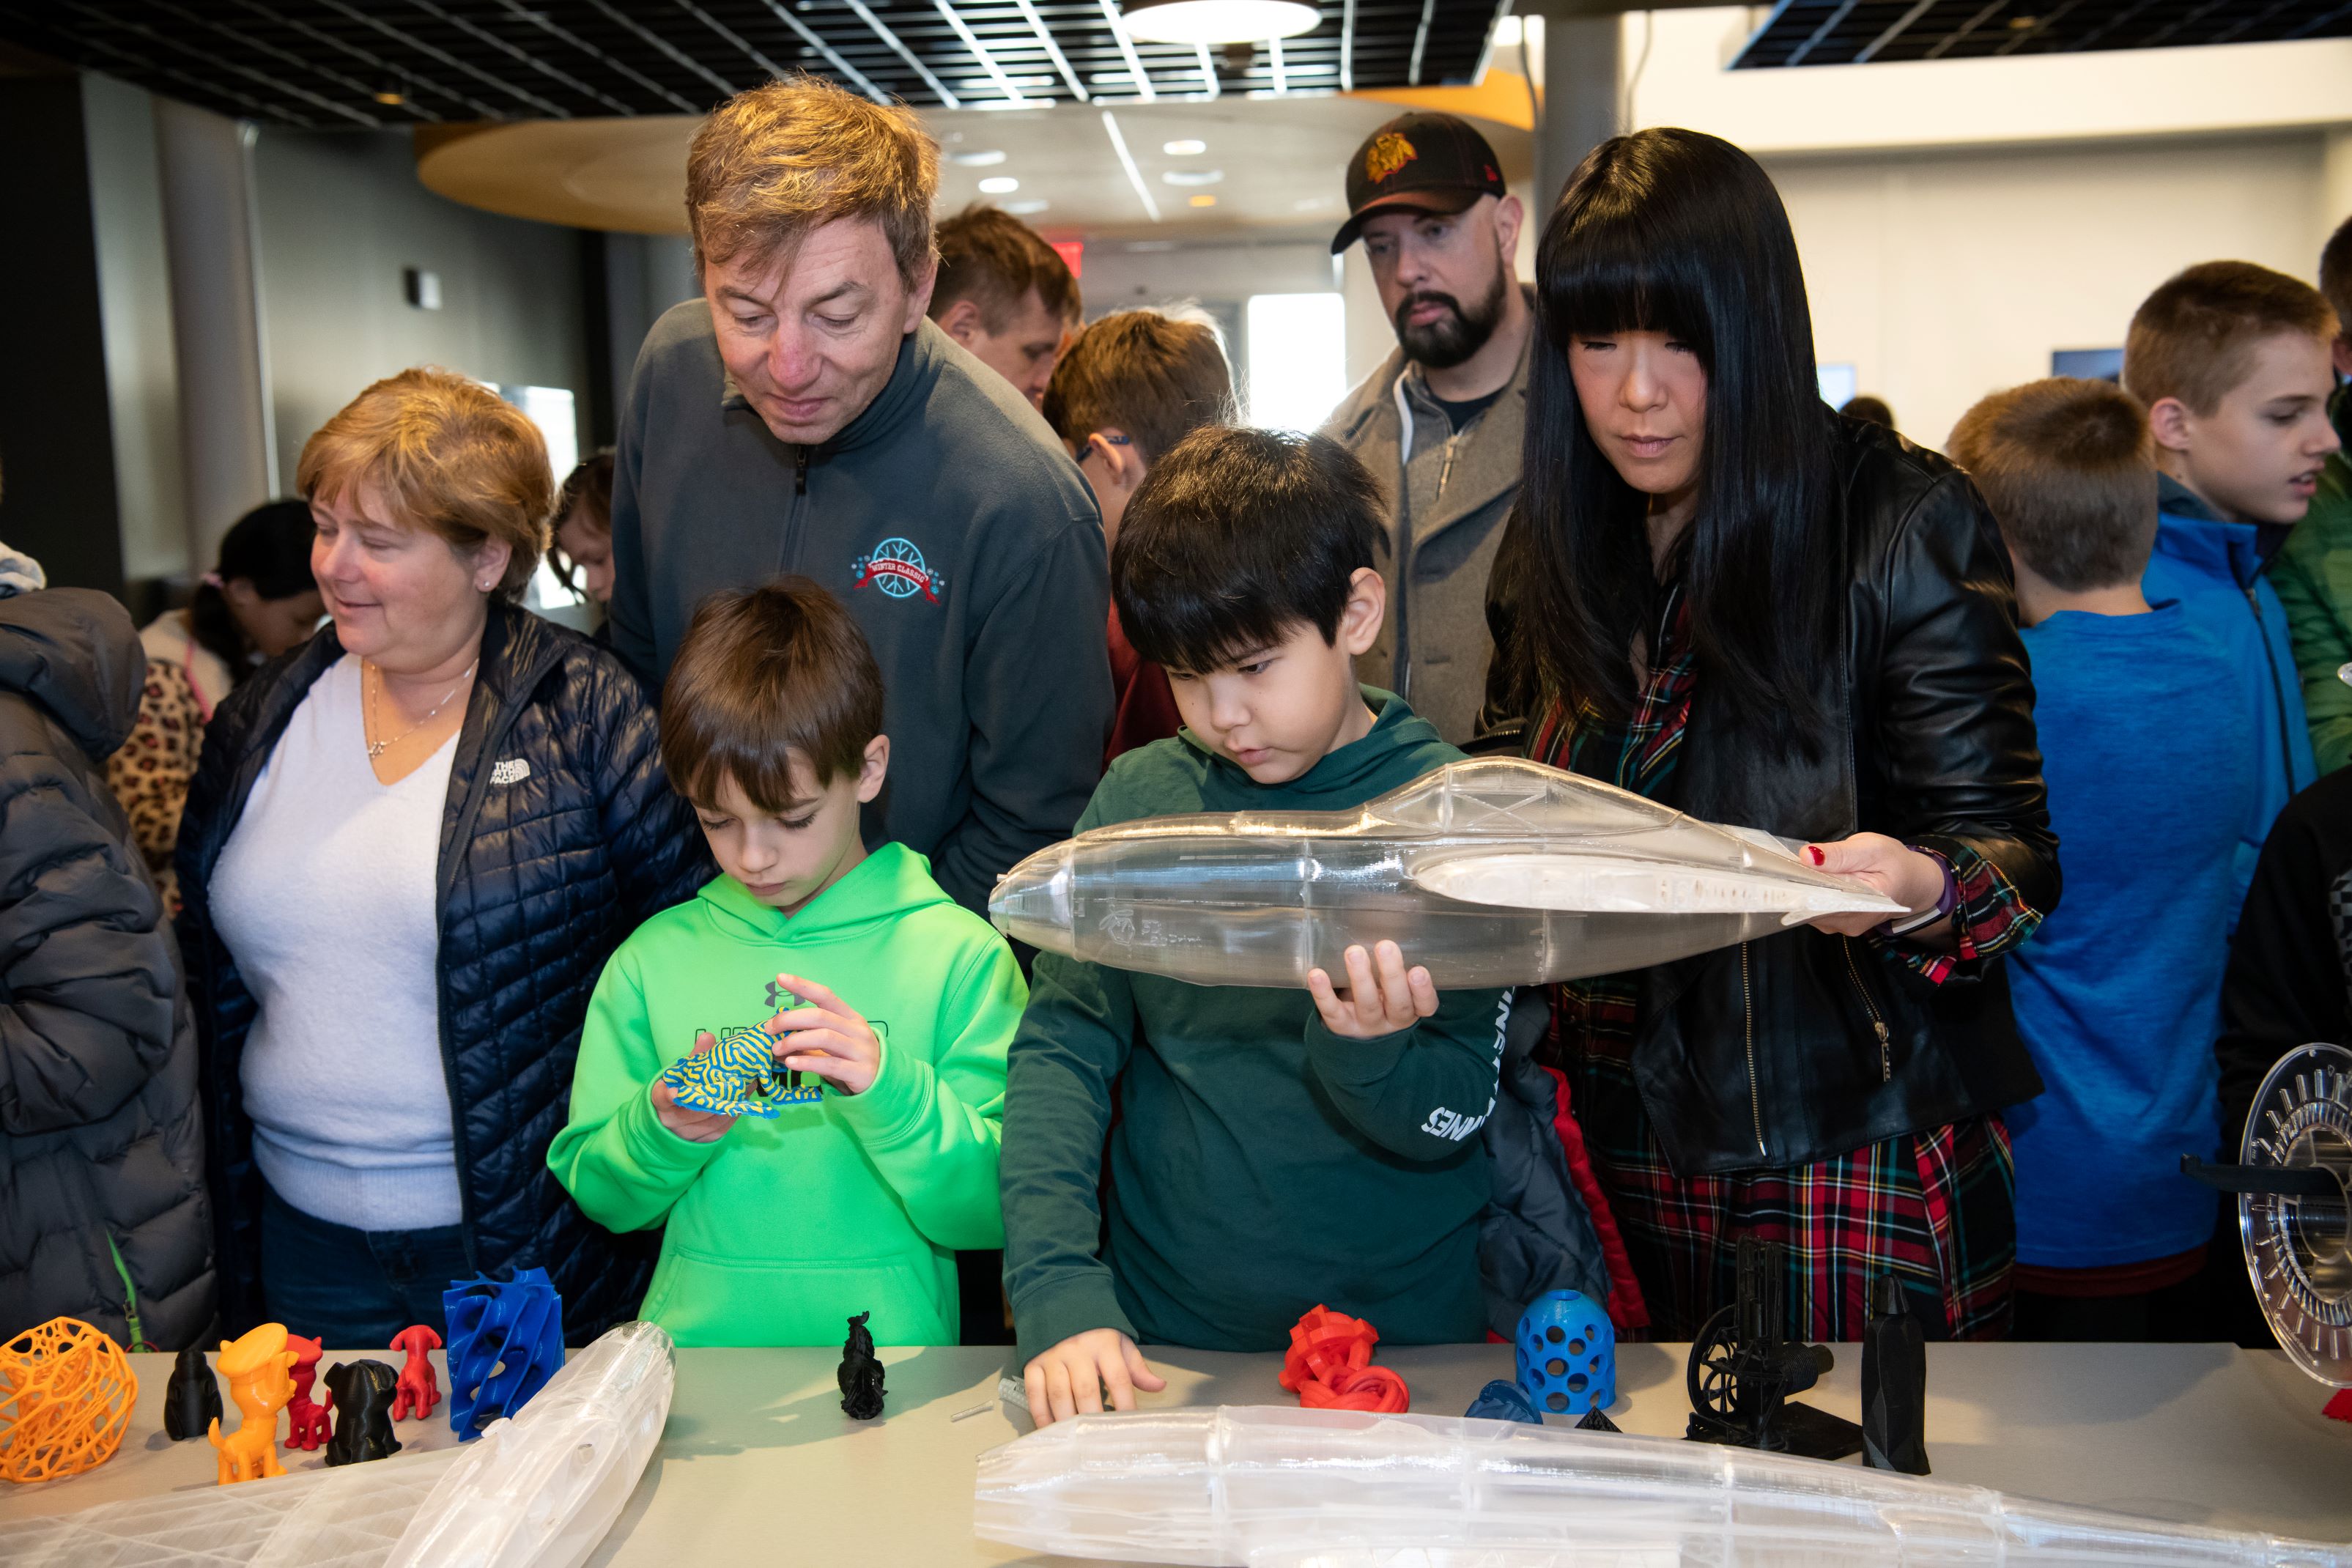 At the Science of 3D Printing show, children look and touch 3D-printed balls, and models of dogs and airplanes.